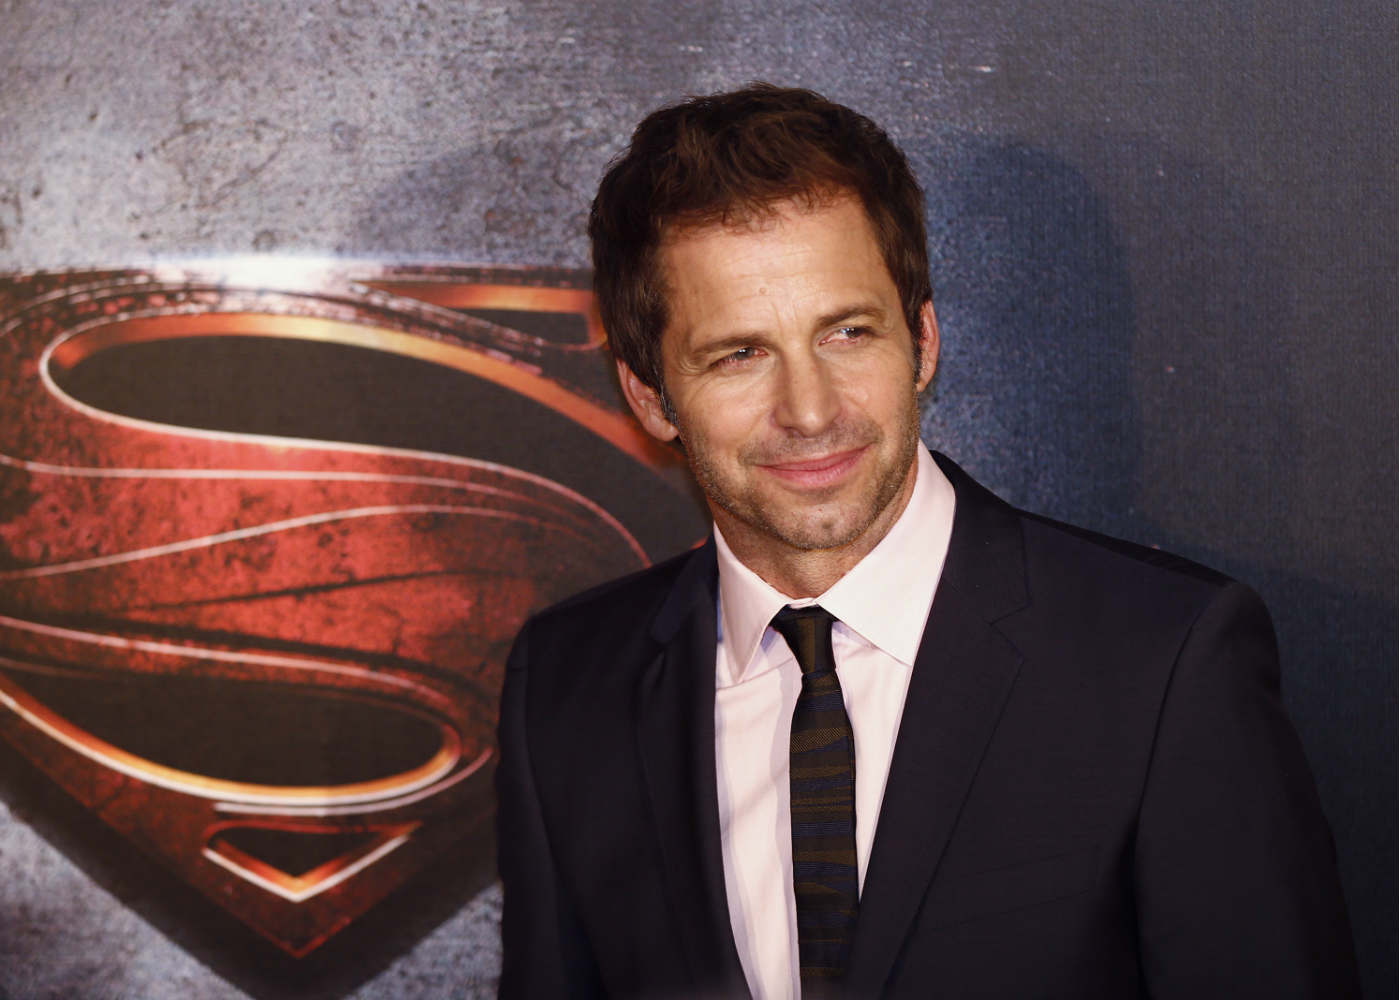 Zack Snyder Steps Down From Justice League Due to Family Tragedy; Joss Whedon to Complete Film